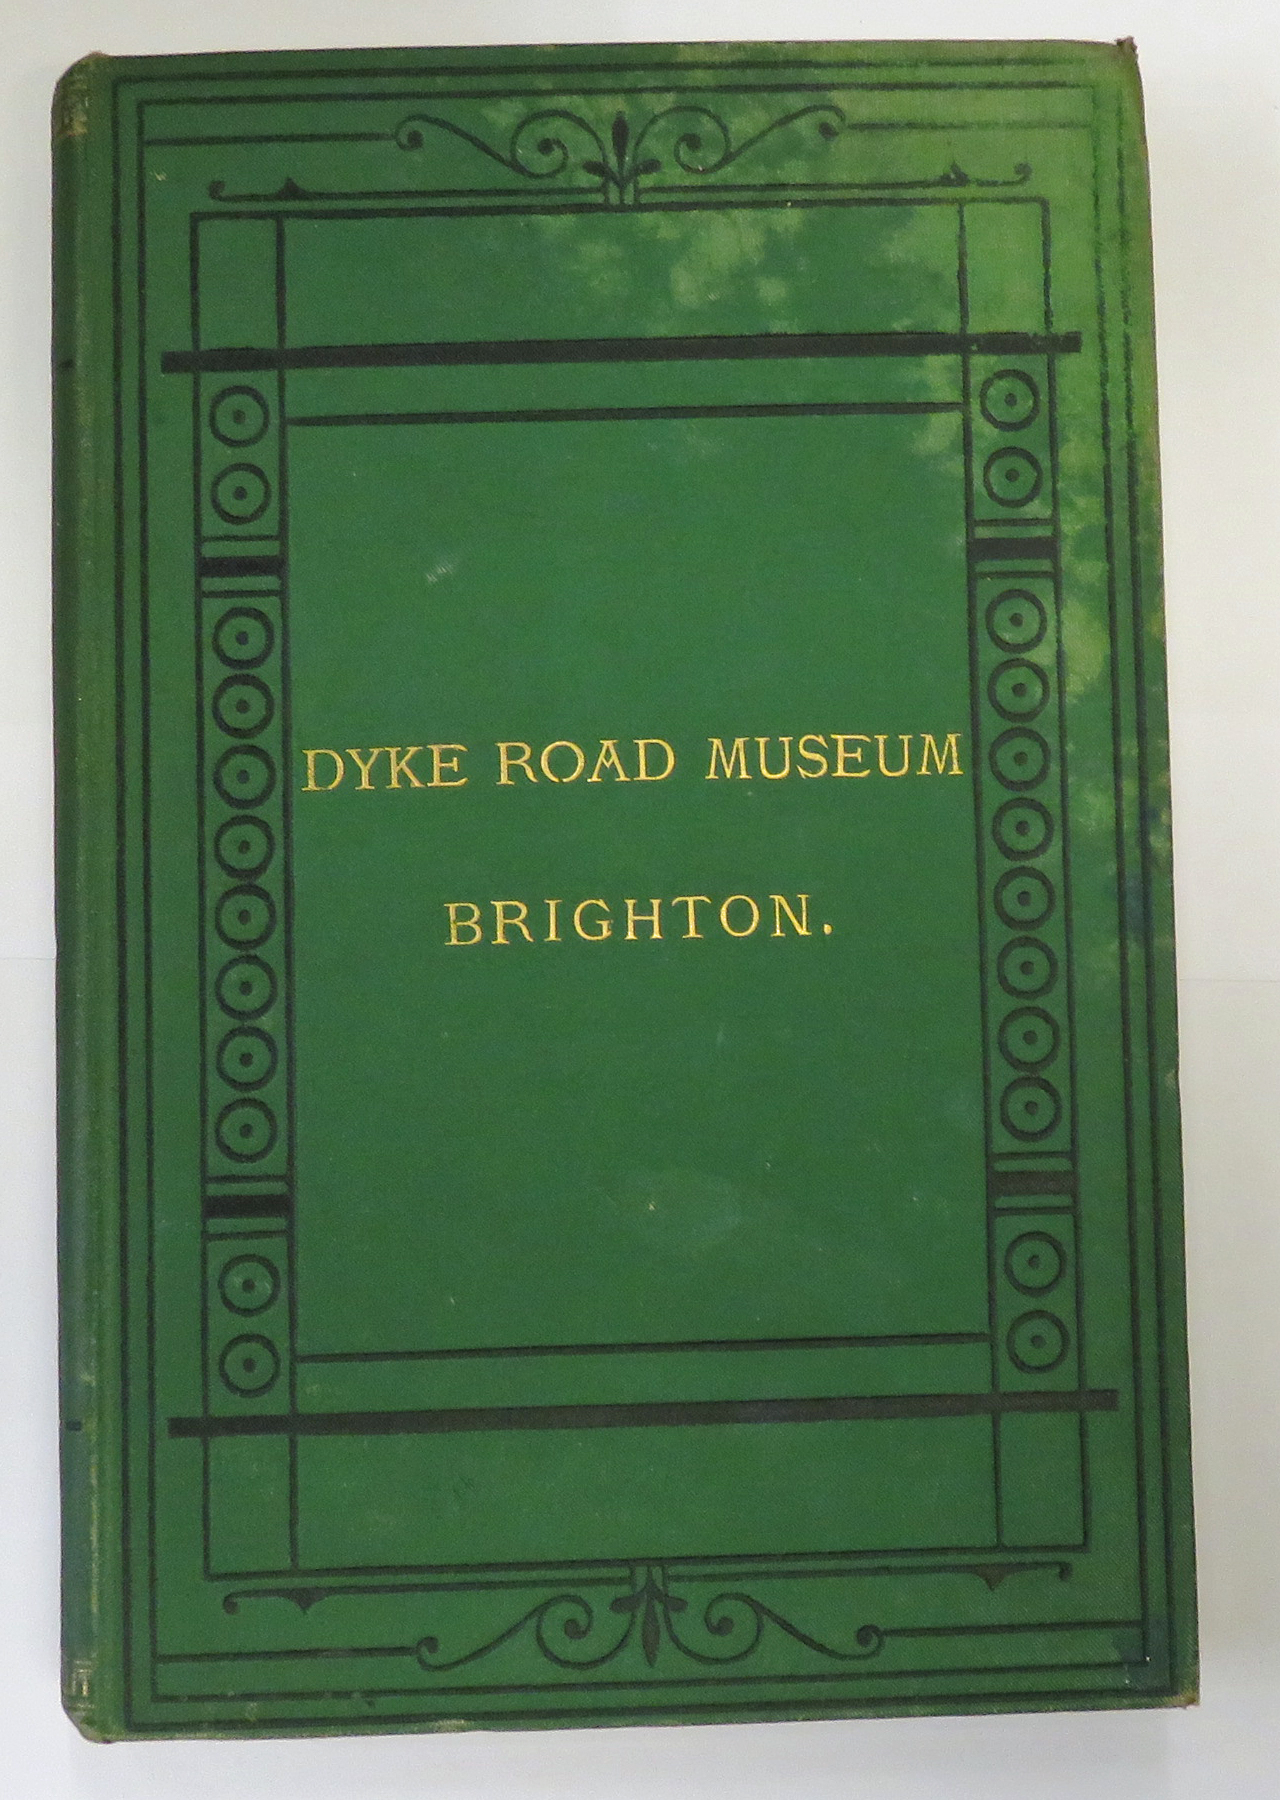 Catalogue Of The Cases Of Birds In The Dyke Road Museum Brighton 